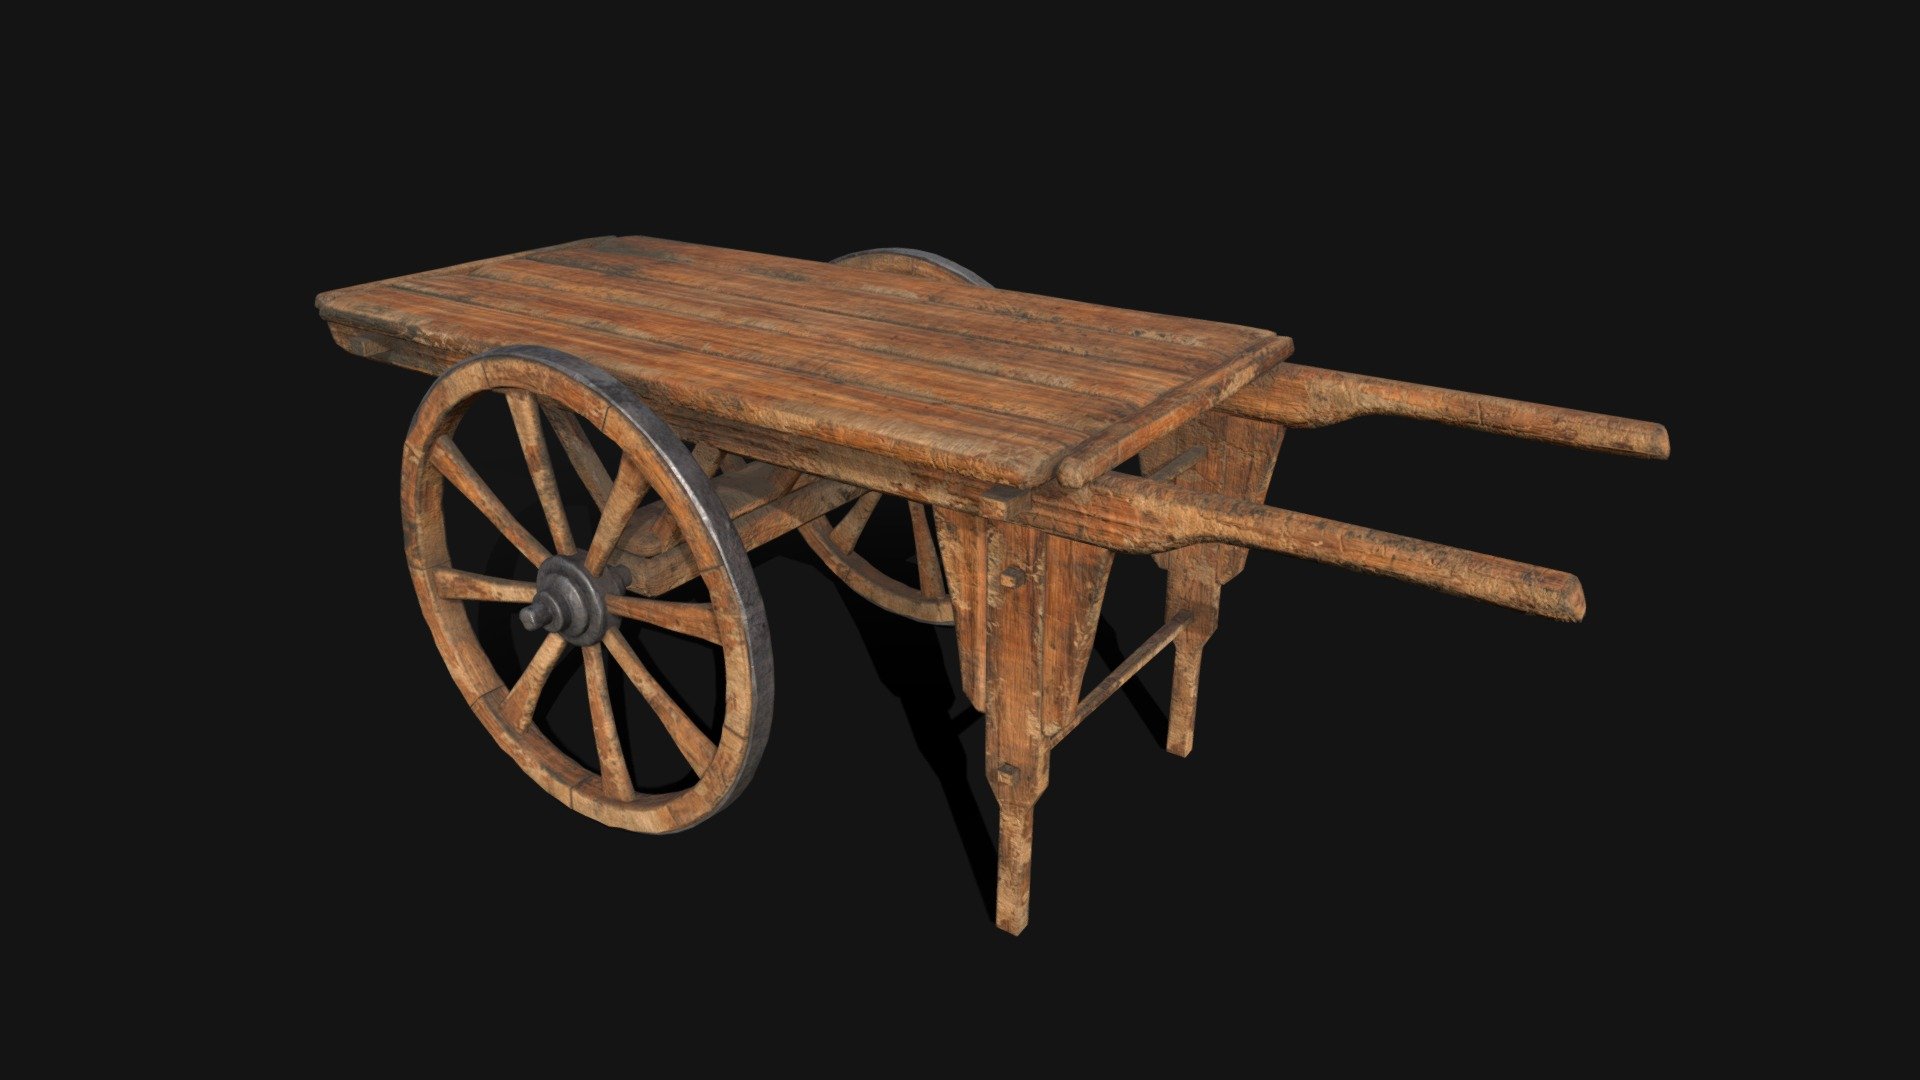 Medieval Rolling Market Table 3D Model. This model contains the Medieval Rolling Market Table itself 

All modeled in Maya, textured with Substance Painter.

The model was built to scale and is UV unwrapped properly. Contains one 4K texture set

⦁   16346 tris. 

⦁   Contains: .FBX .OBJ and .DAE

⦁   Model has clean topology. No Ngons.

⦁   Built to scale

⦁   Unwrapped UV Map

⦁   4K Texture set

⦁   High quality details

⦁   Based on real life references

⦁   Renders done in Marmoset Toolbag

Polycount: 

Verts 8547

Edges 16900 

Faces 8425

Tris 16346

If you have any questions please feel free to ask me 3d model